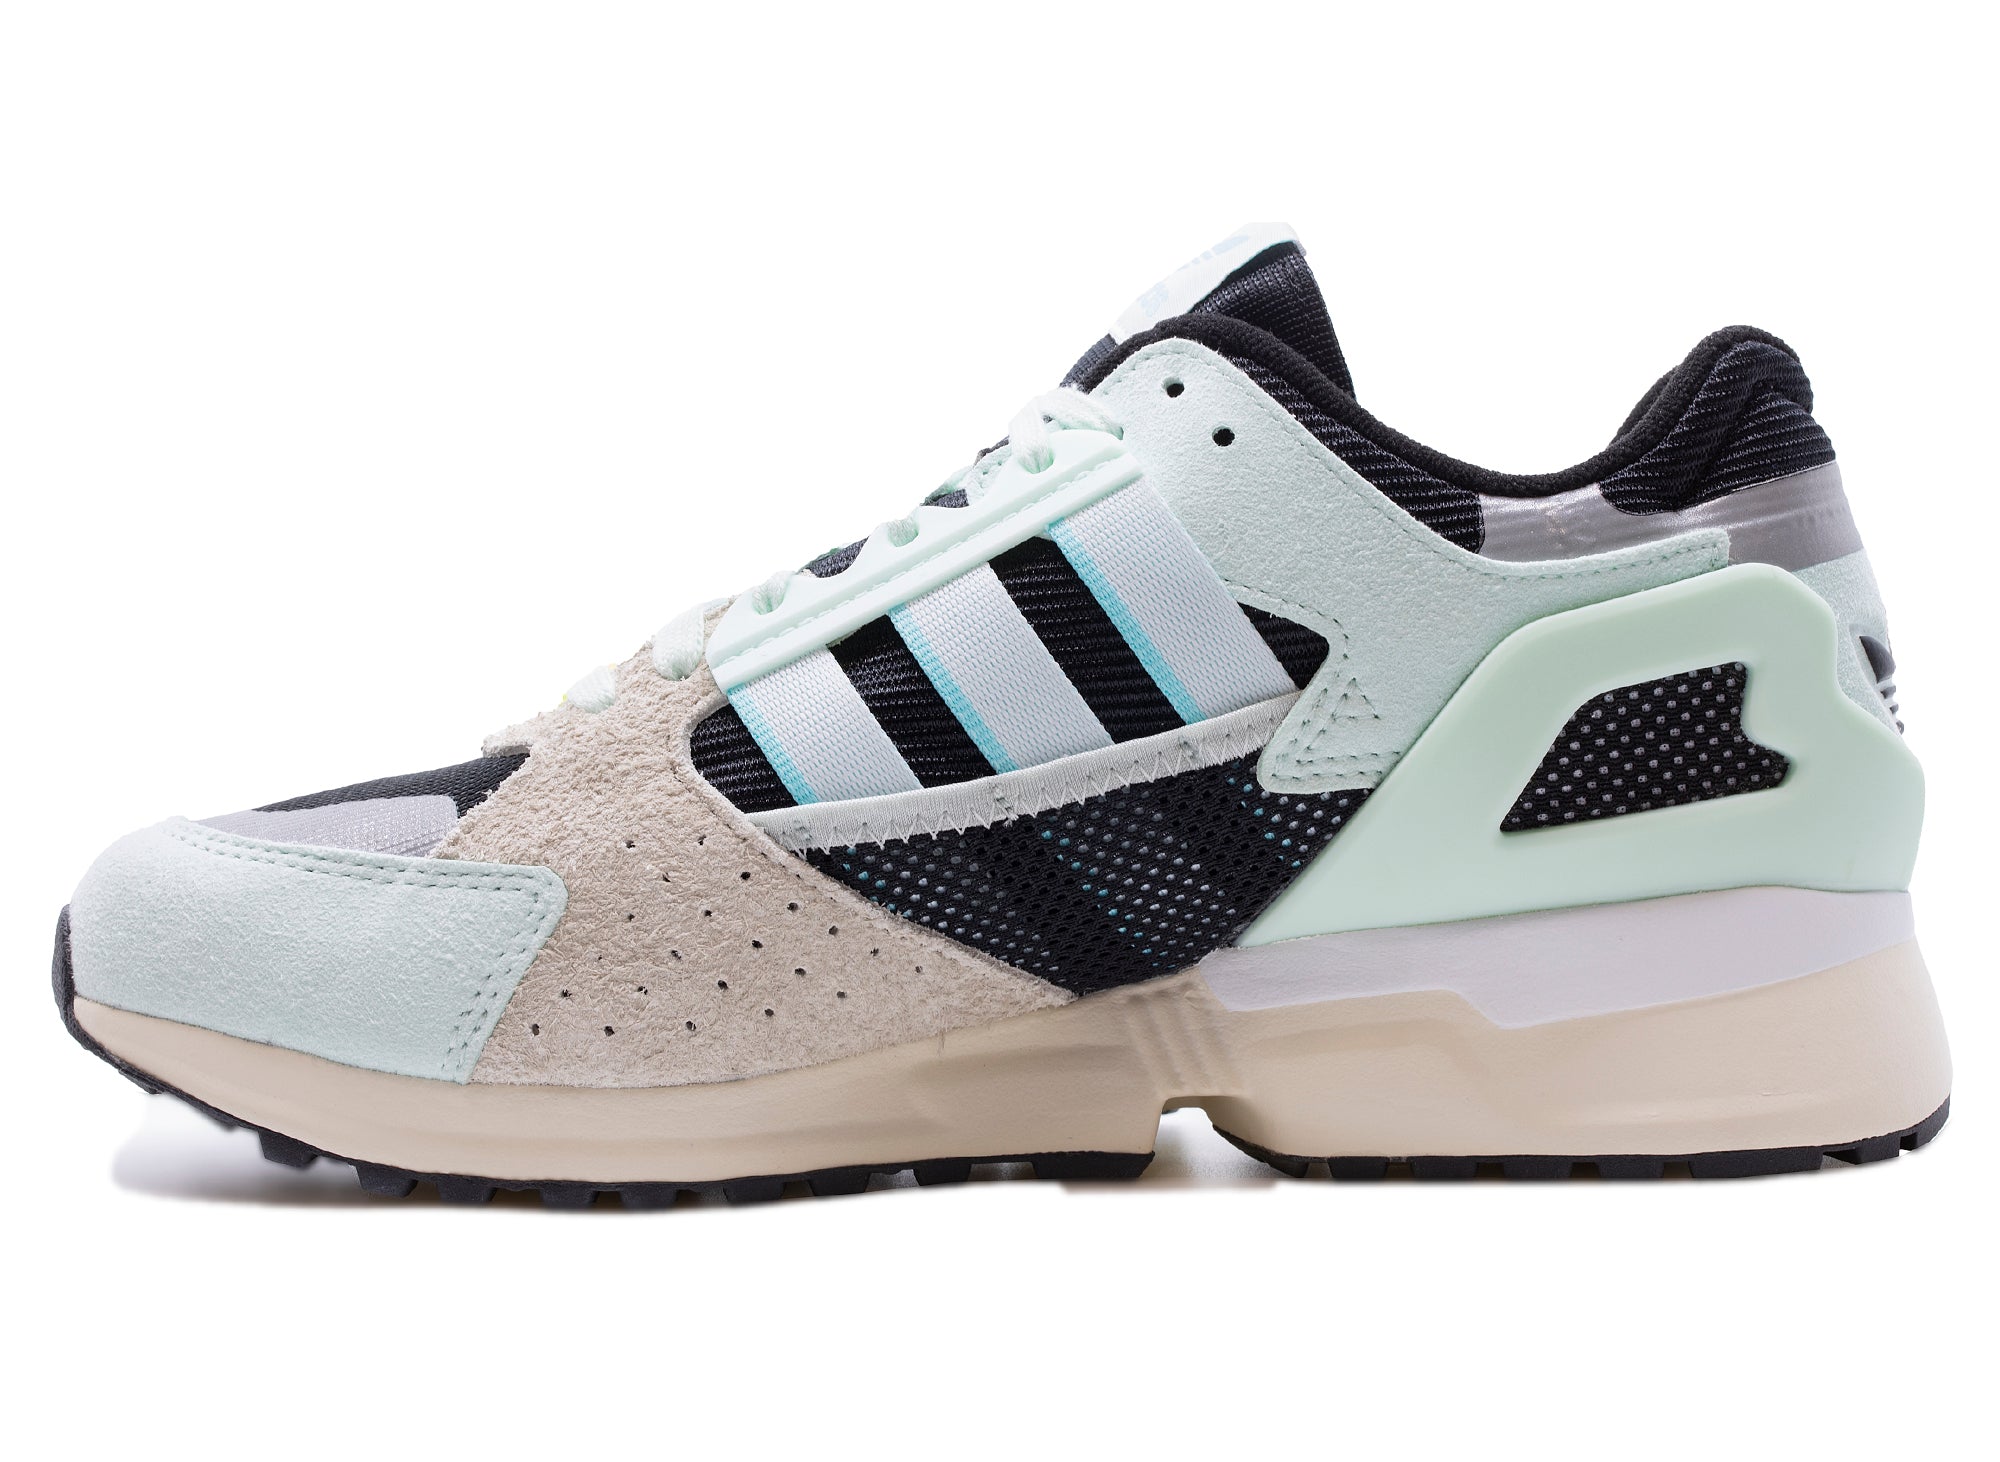 ADIDAS ZX 10,000 C - Oneness Boutique